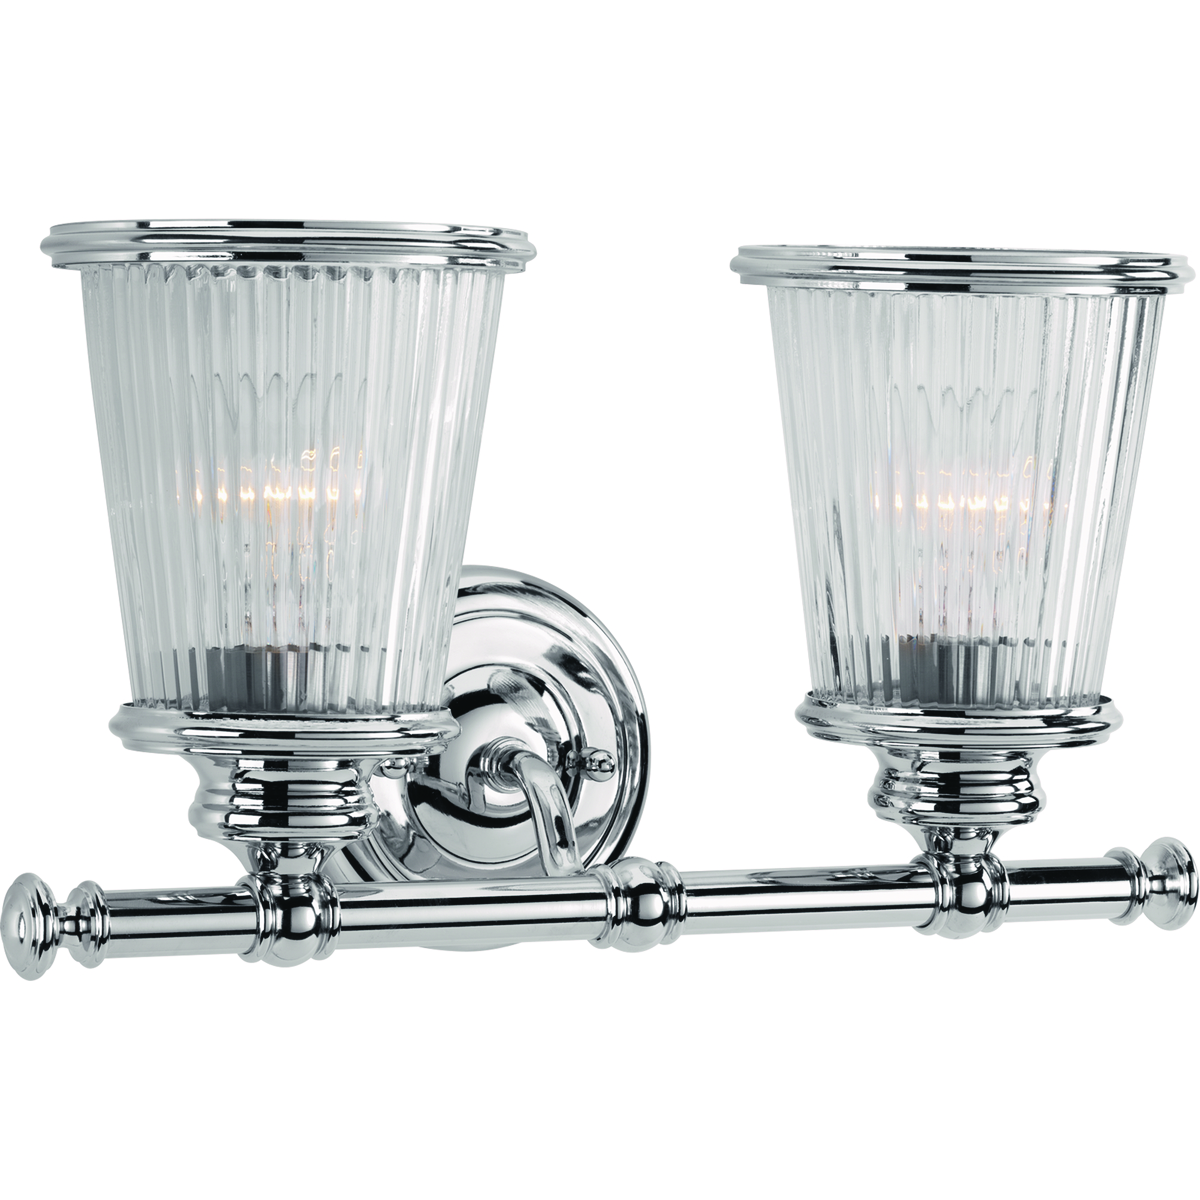 Two-light bath & vanity features vintage-inspired clear ribbed class finished with a metal trim ring offers a romantic effect for the bath and vanity area. Matches popular faucet collection. Mounts in up or down position. Polished Chrome finish.